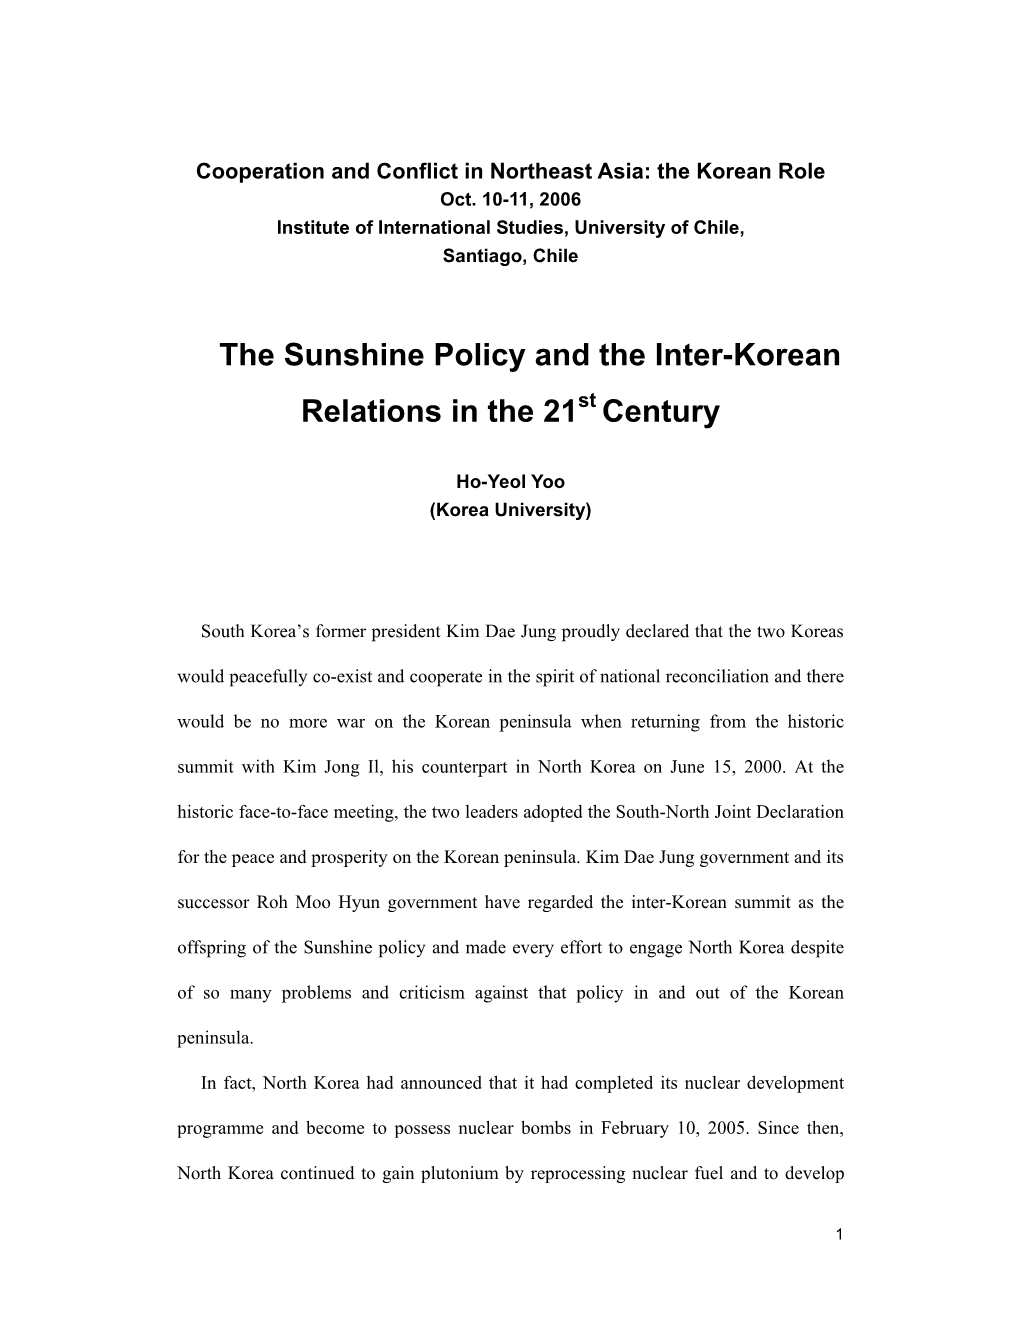 The Sunshine Policy and the Inter-Korean Relations in the 21St Century